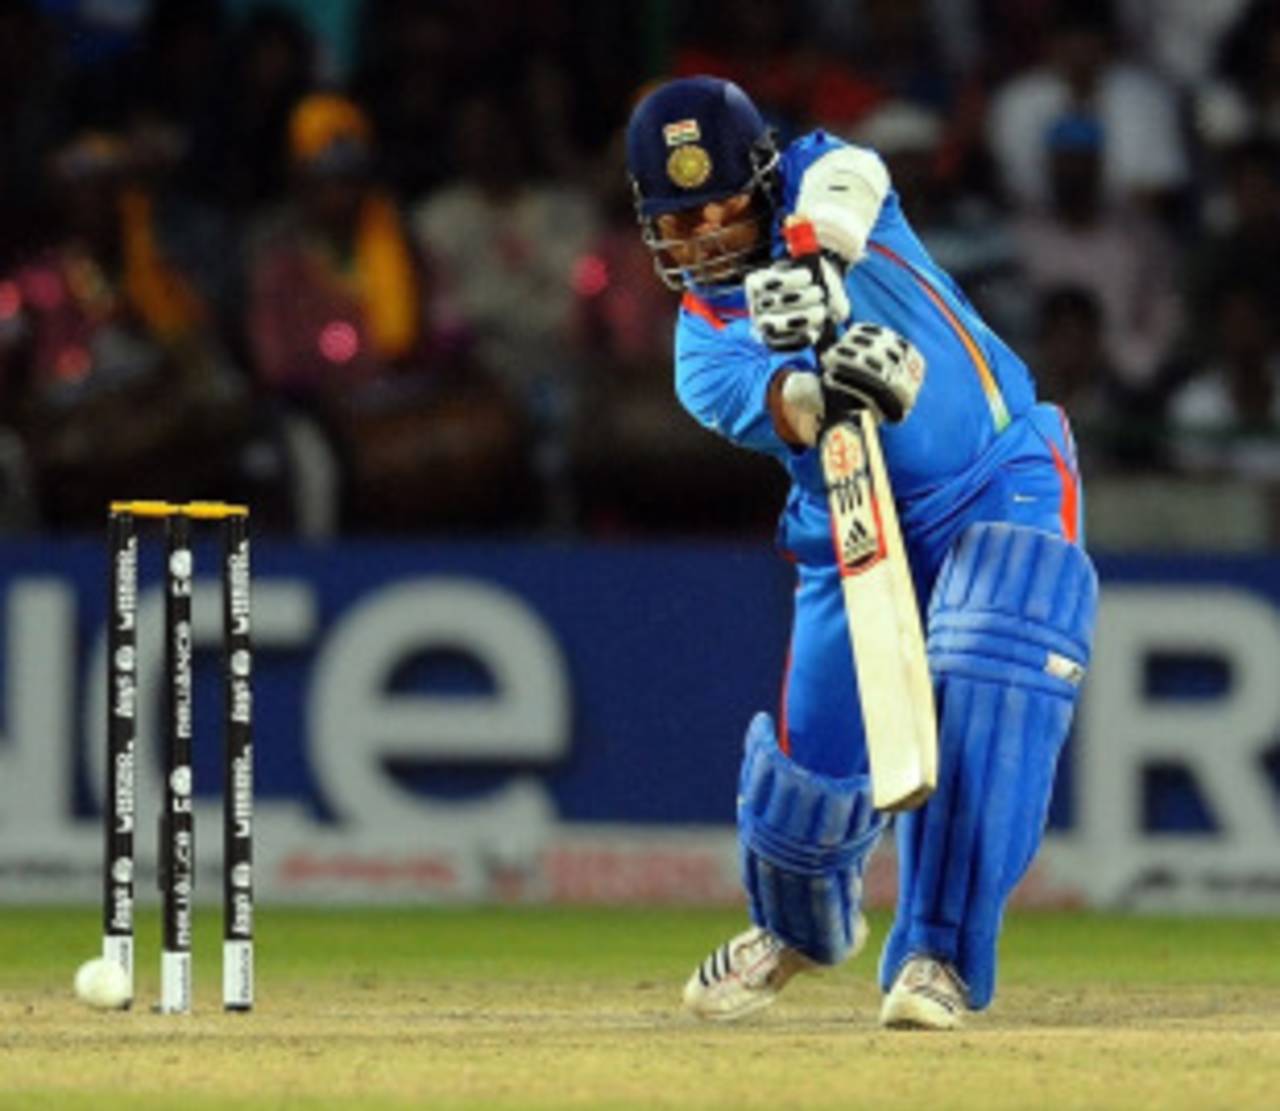 Sachin Tendulkar plays one to the off side, India v Netherlands, Group B, World Cup, Delhi, March 9, 2011